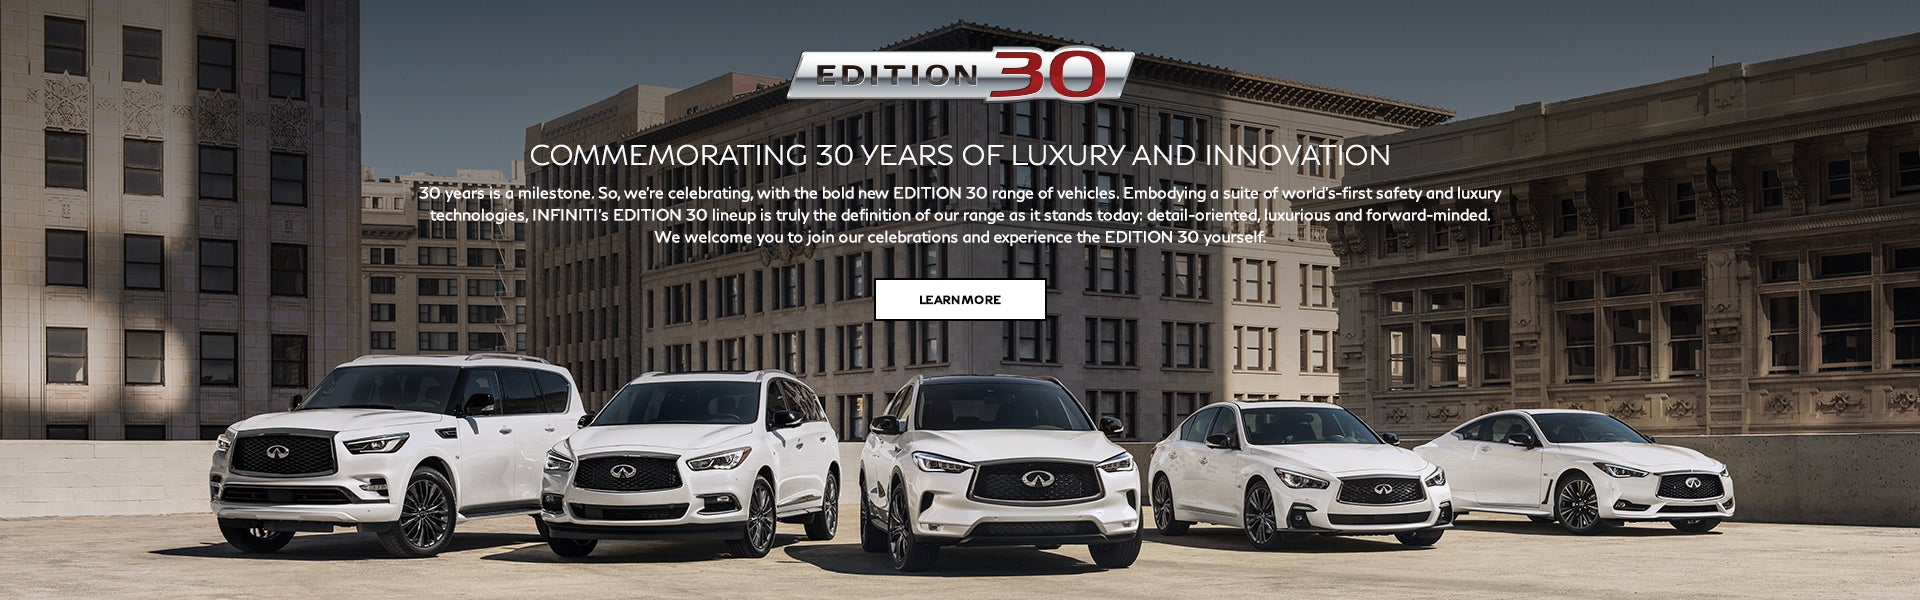 Commemorating 30 Years of Luxury and Innovation Edition 30